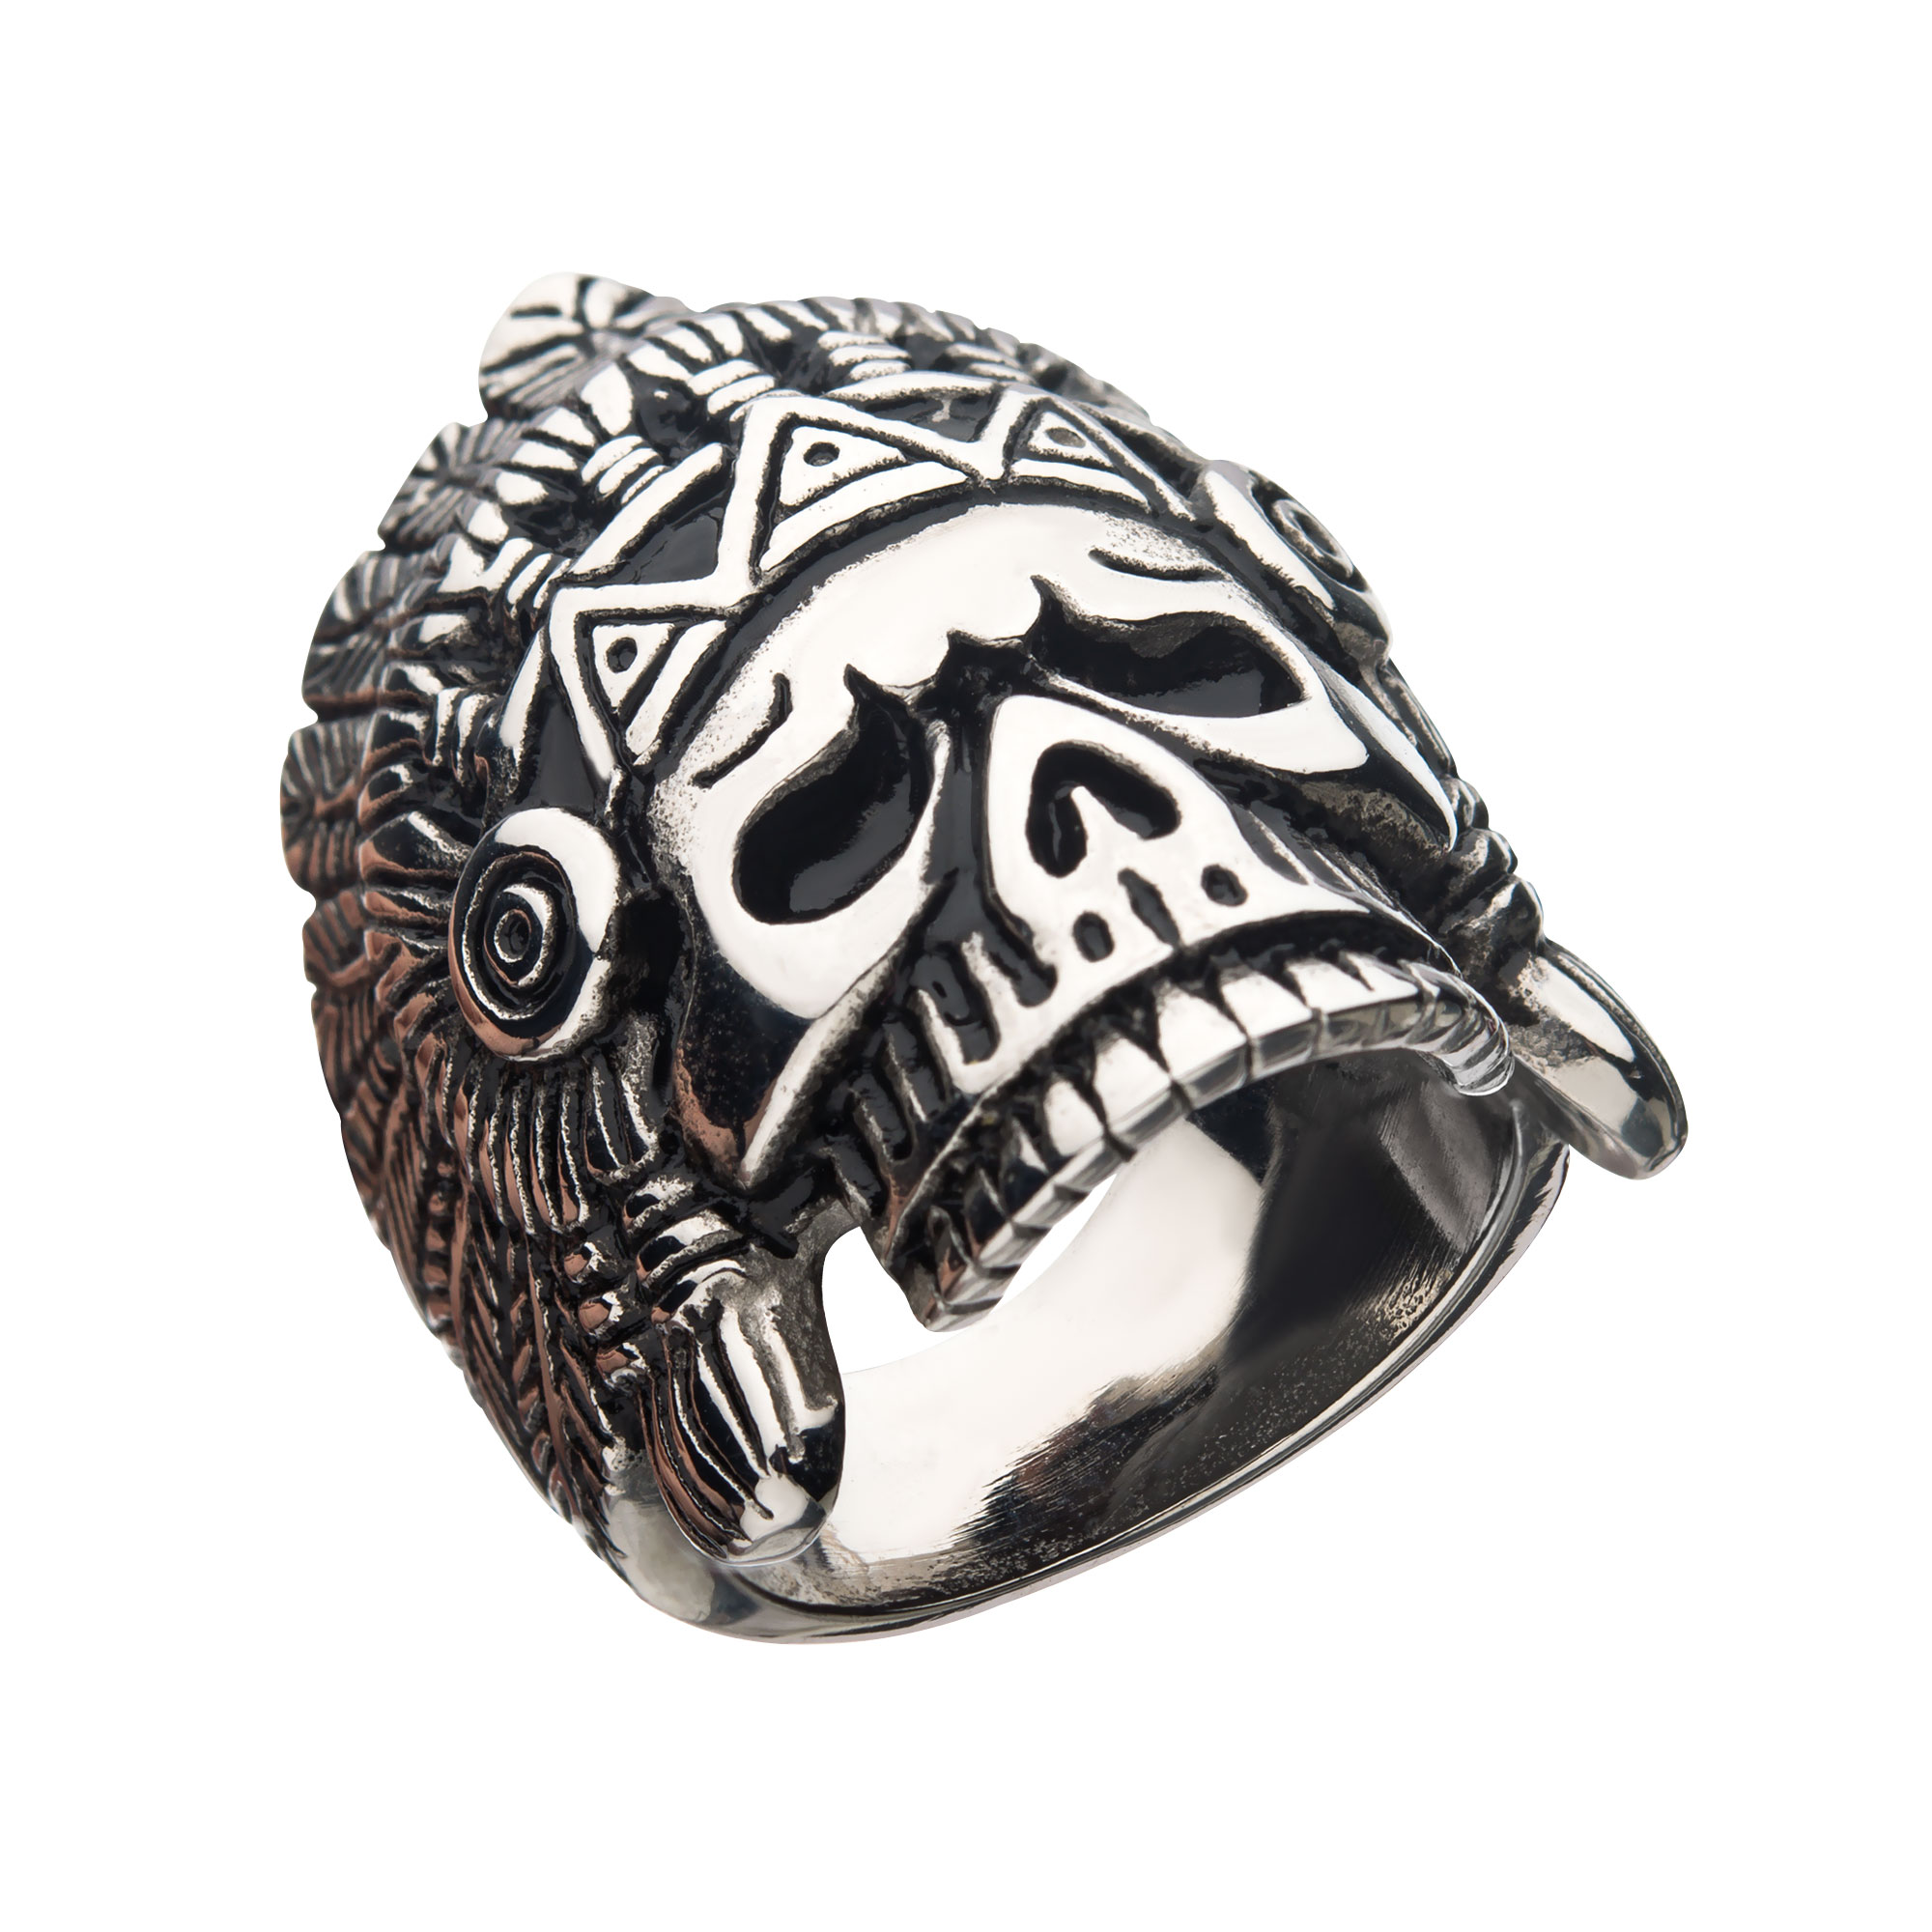 Oxidized Stainless Steel Chief Skull Ring Lewis Jewelers, Inc. Ansonia, CT